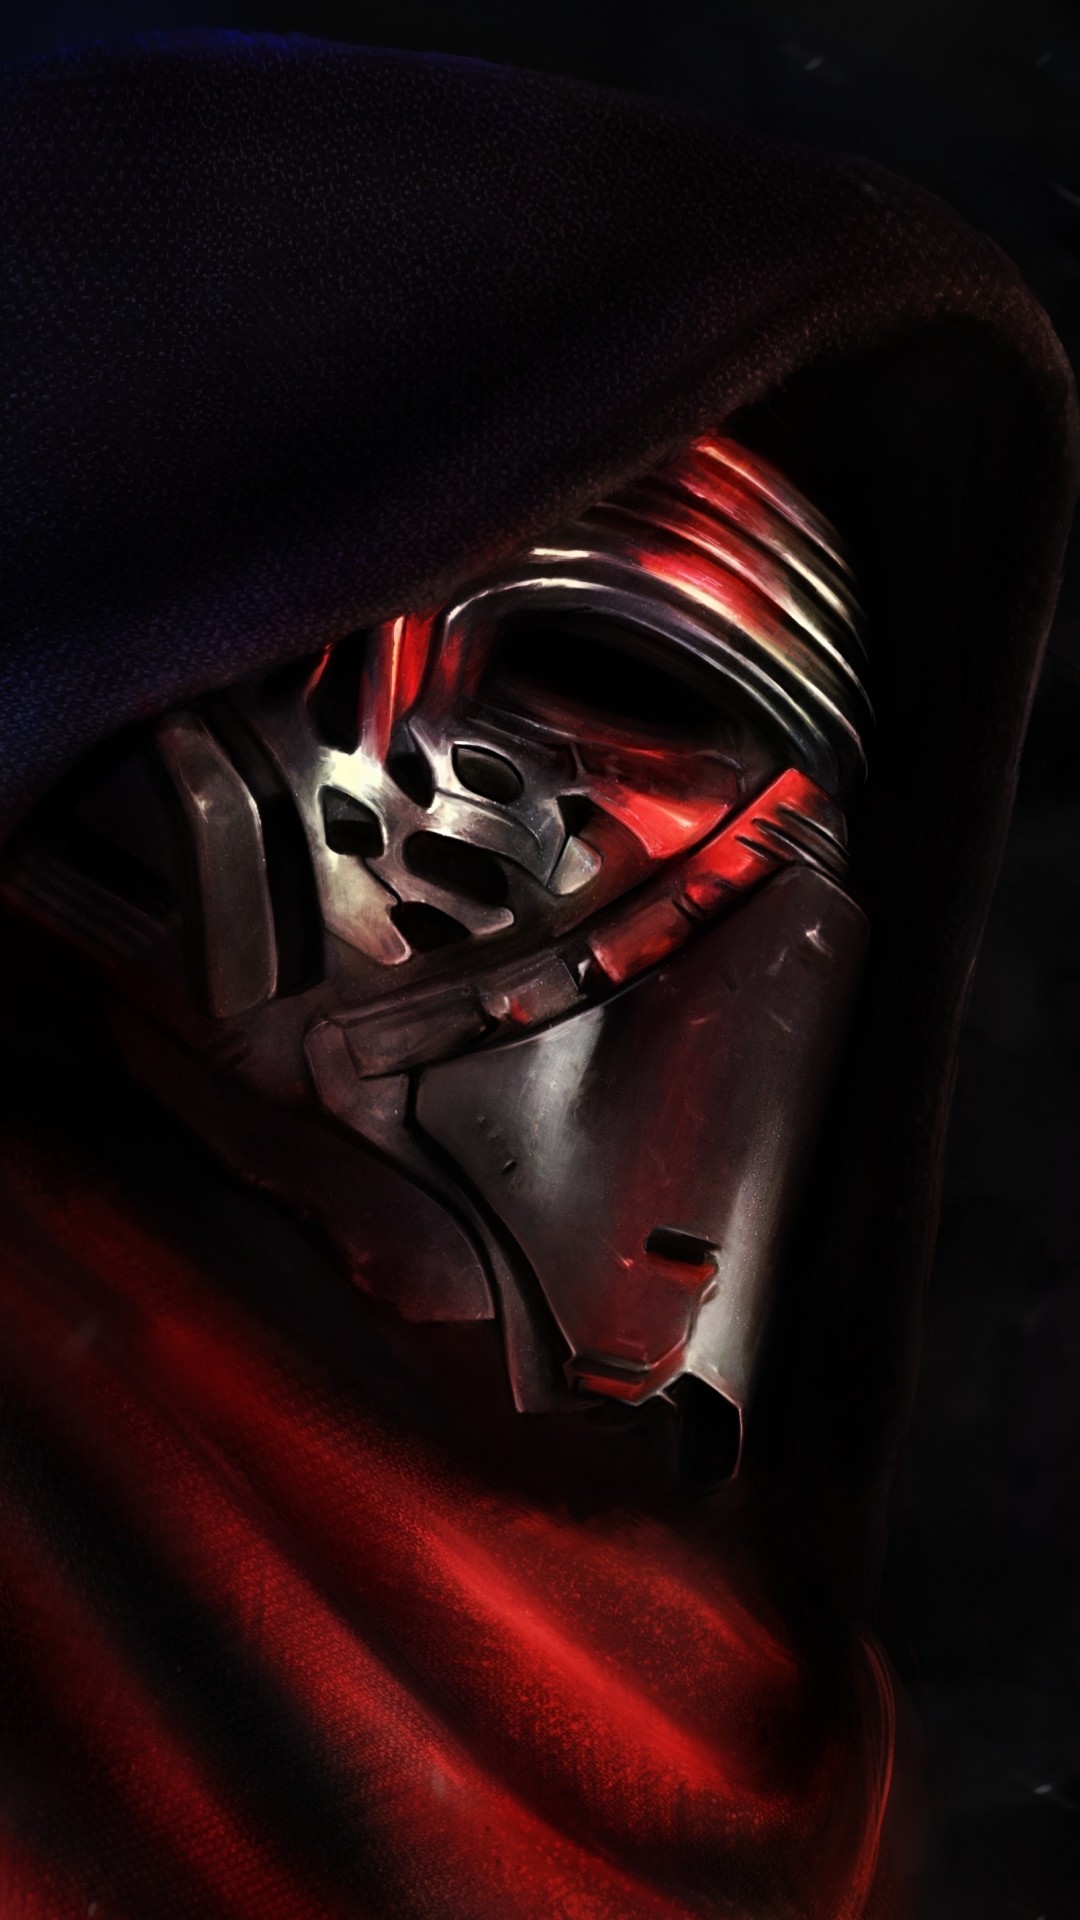 Star Wars The Force Awakens, Wallpapers para iPhone